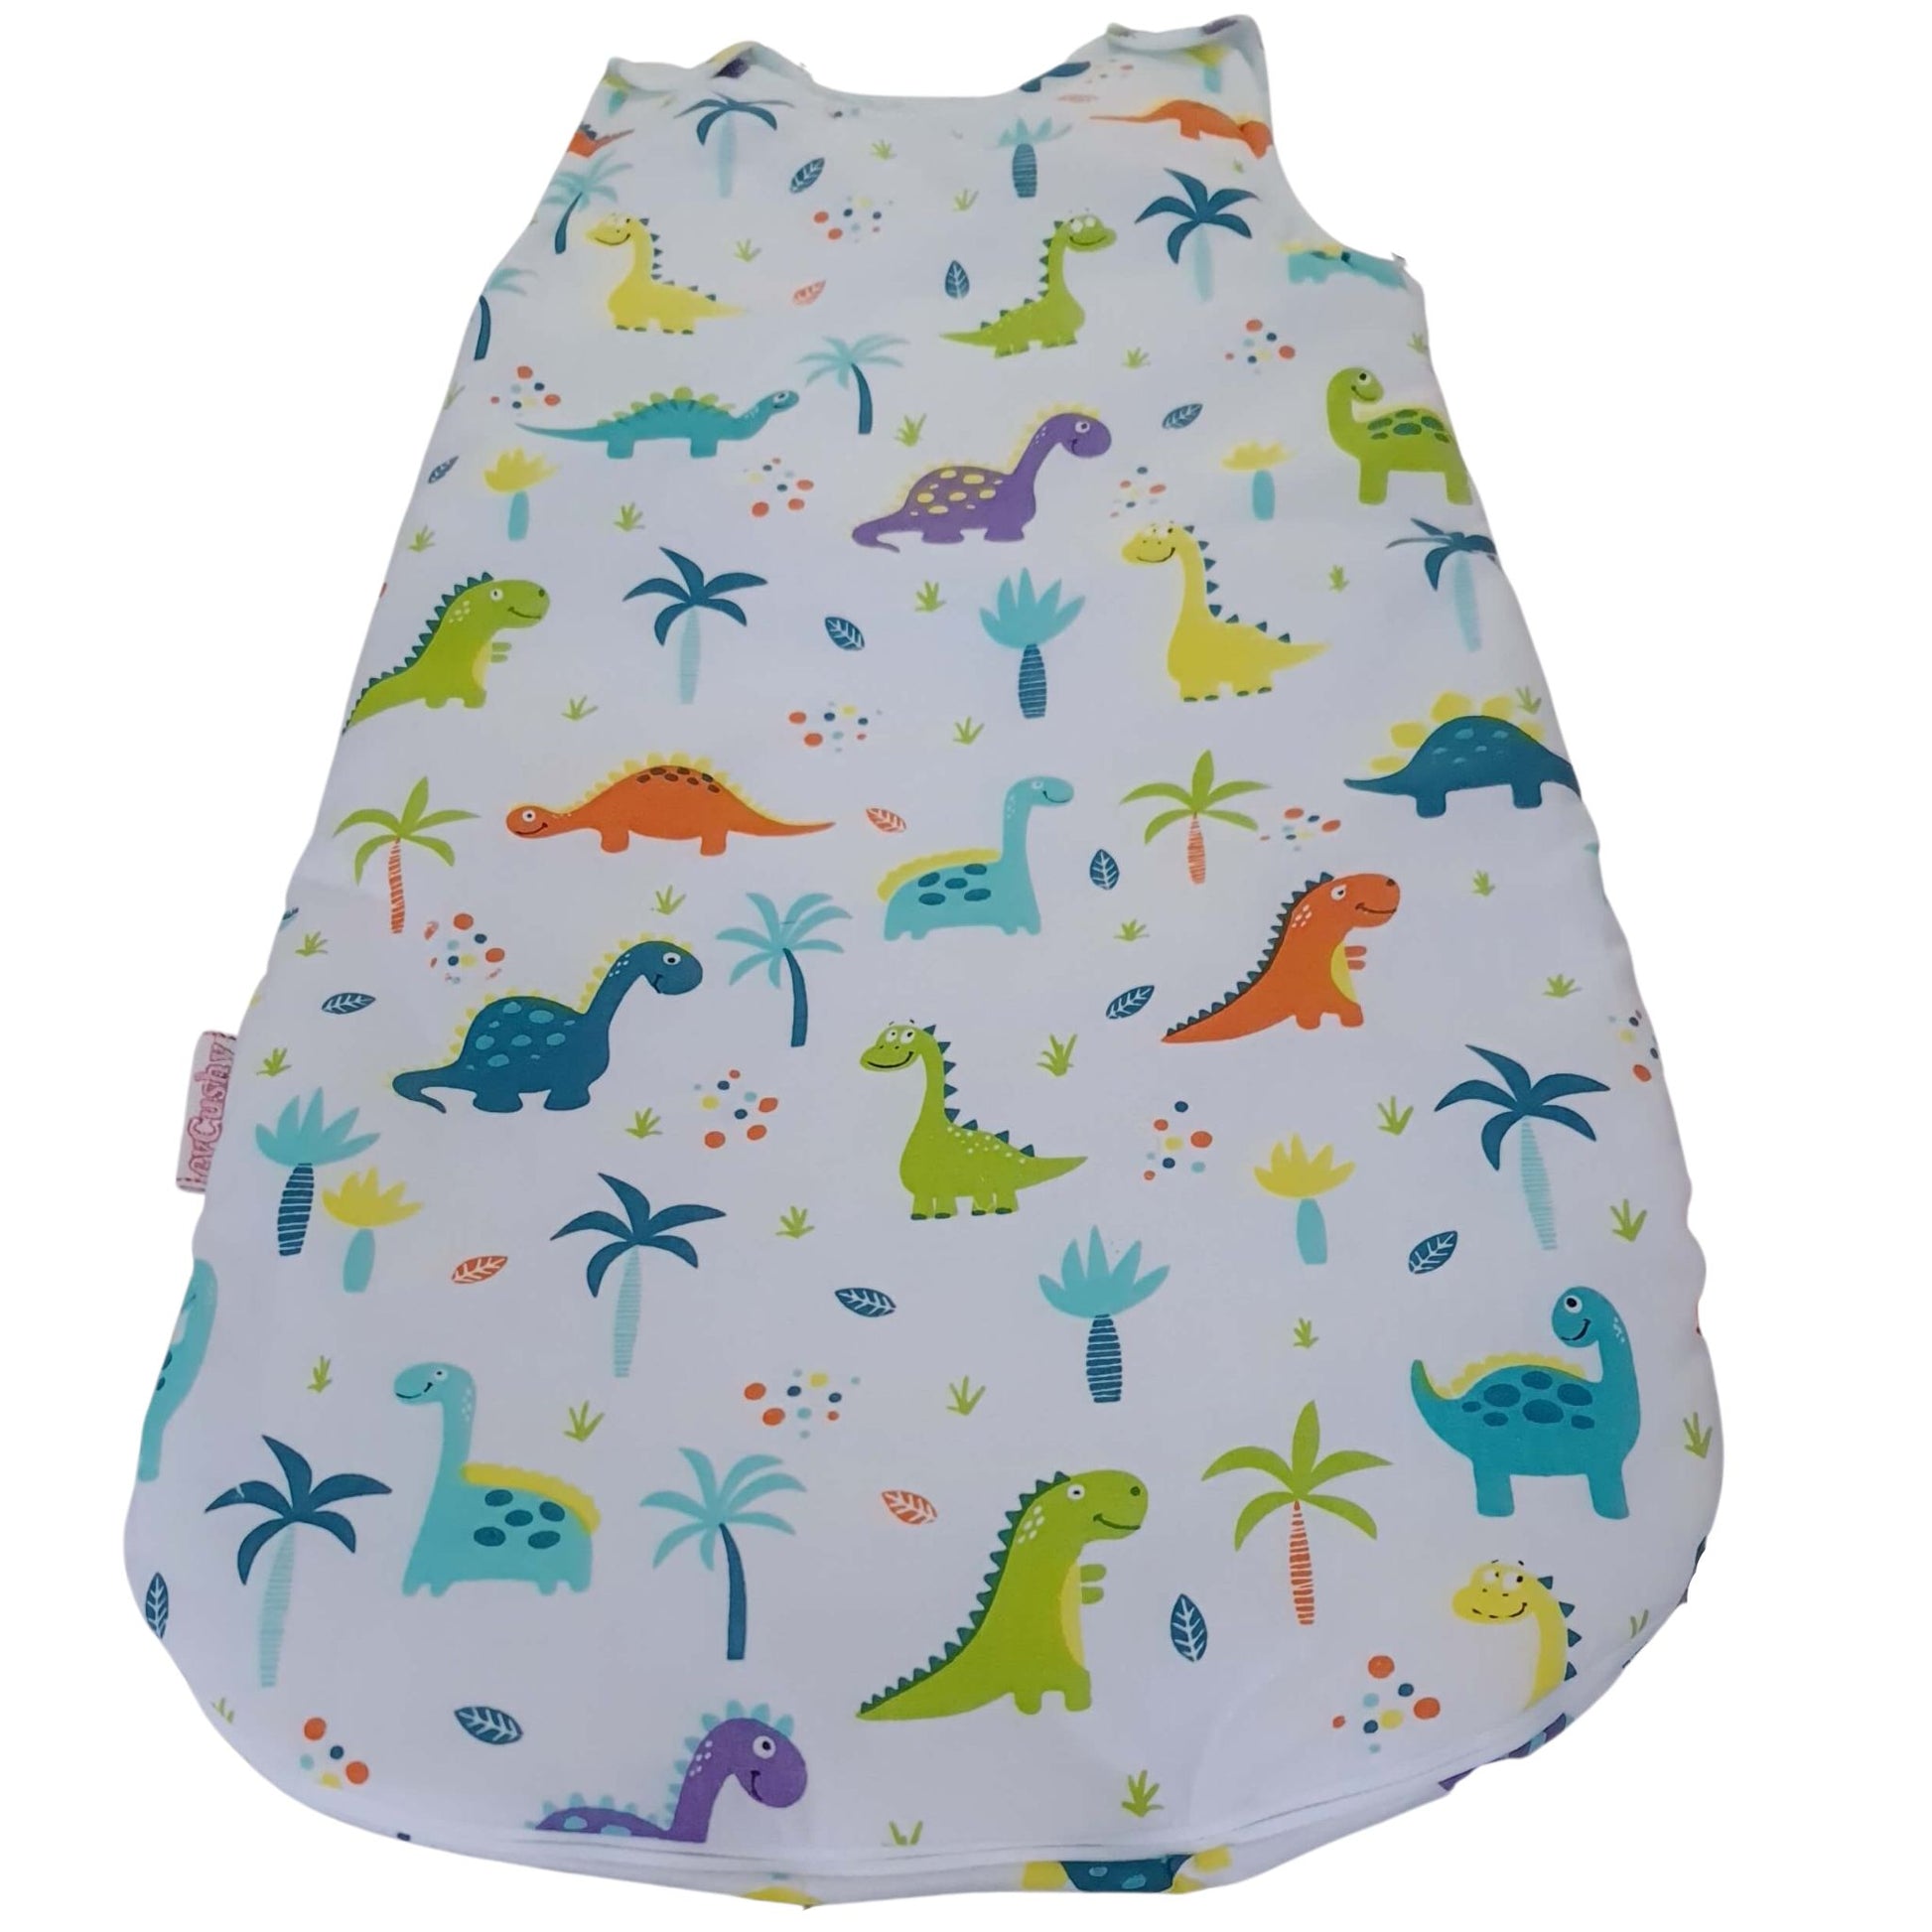 evcushy sleeping bag for baby 2.5 tog cotton with dinosaurs pattern